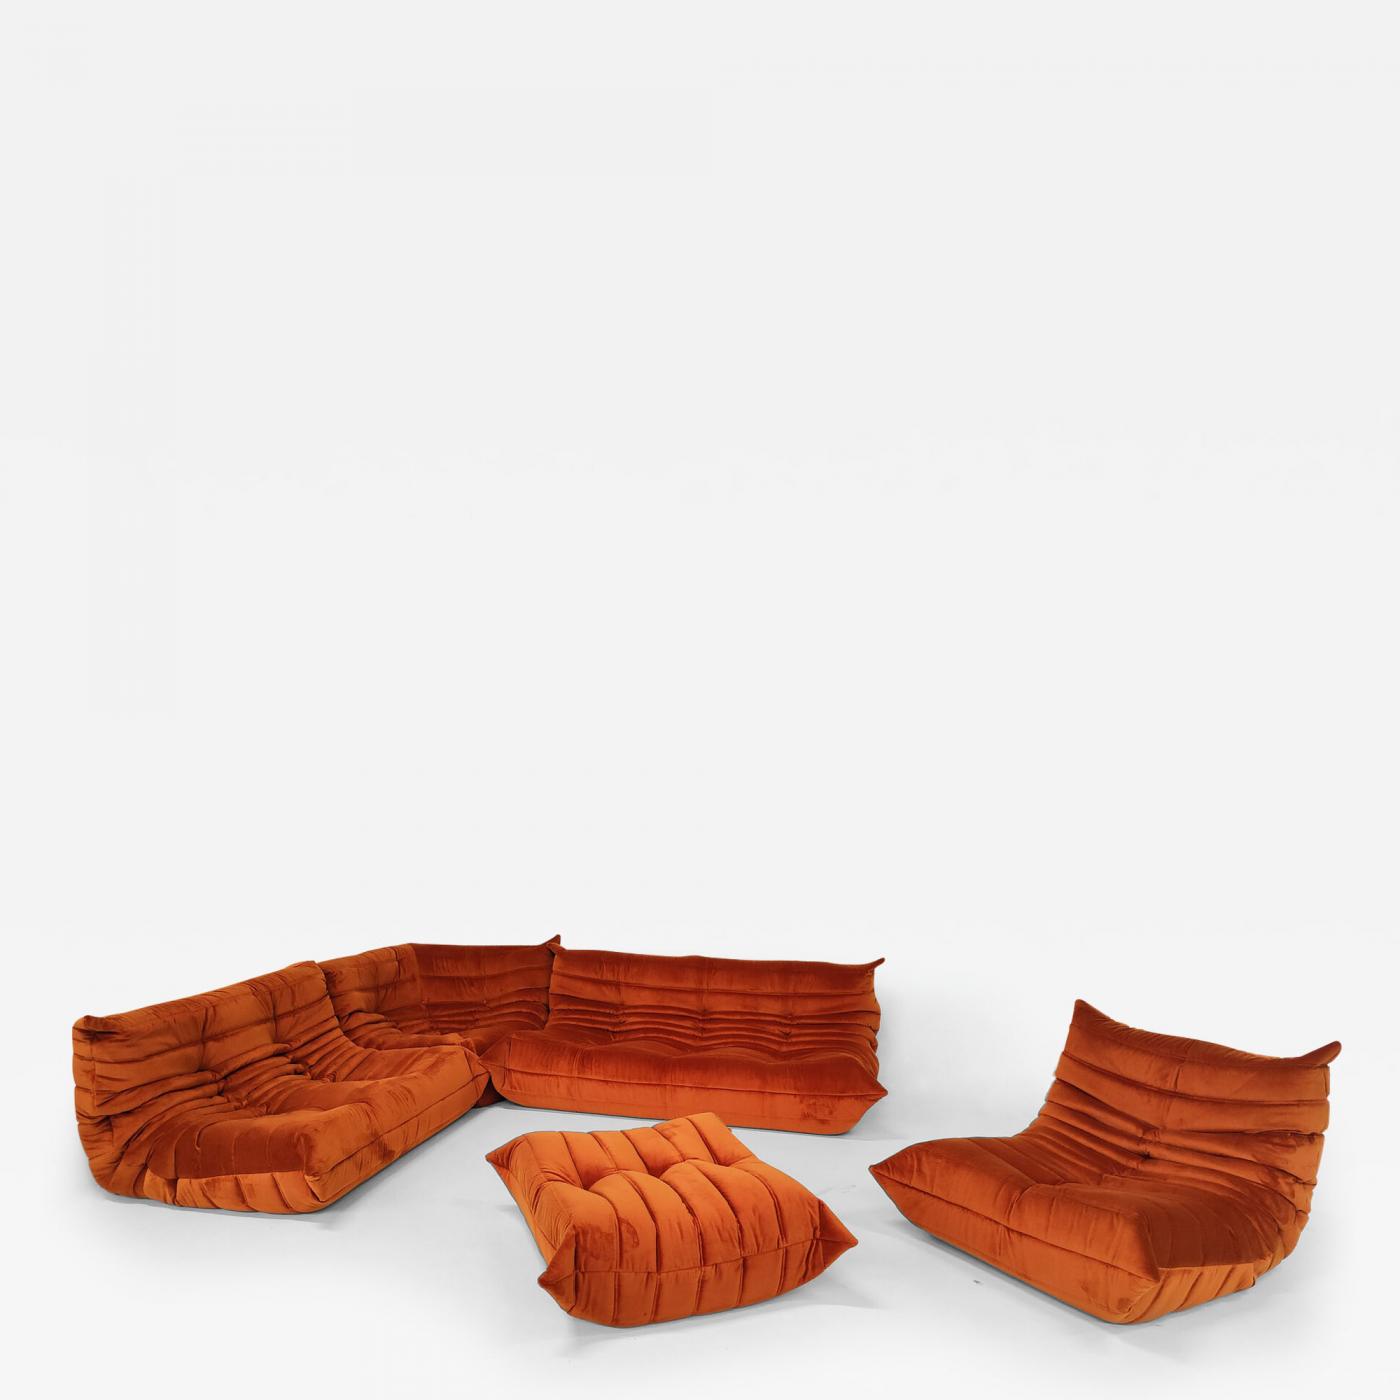 Togo Sofa by Michel Ducaroy Two Seater